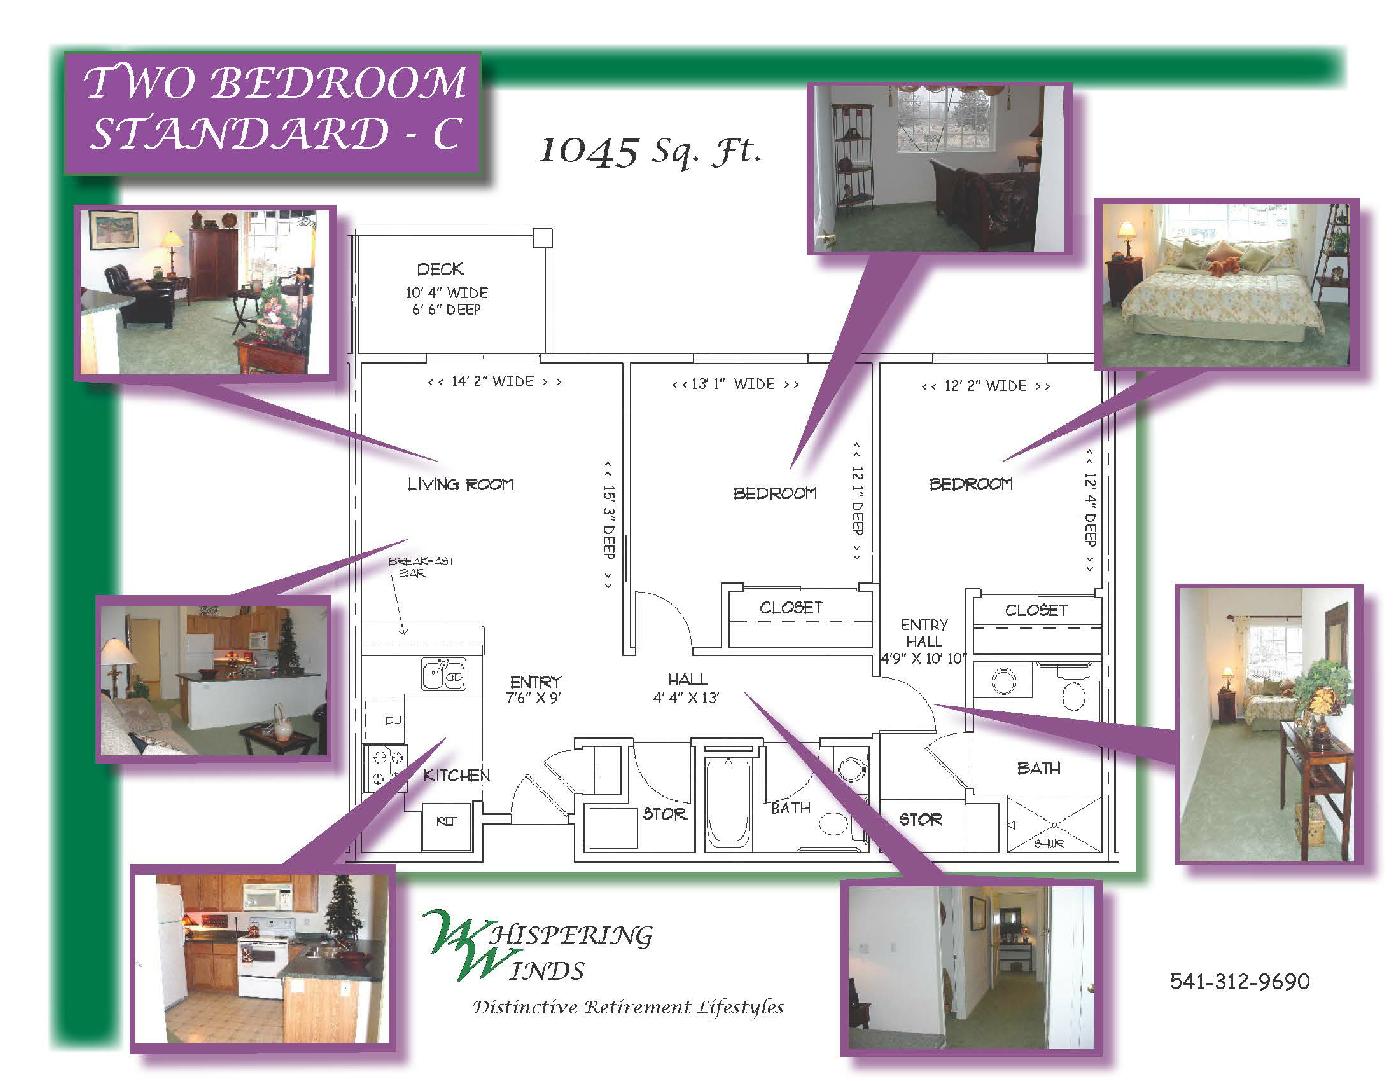 Layout Example - Two Bedroom Standard - C